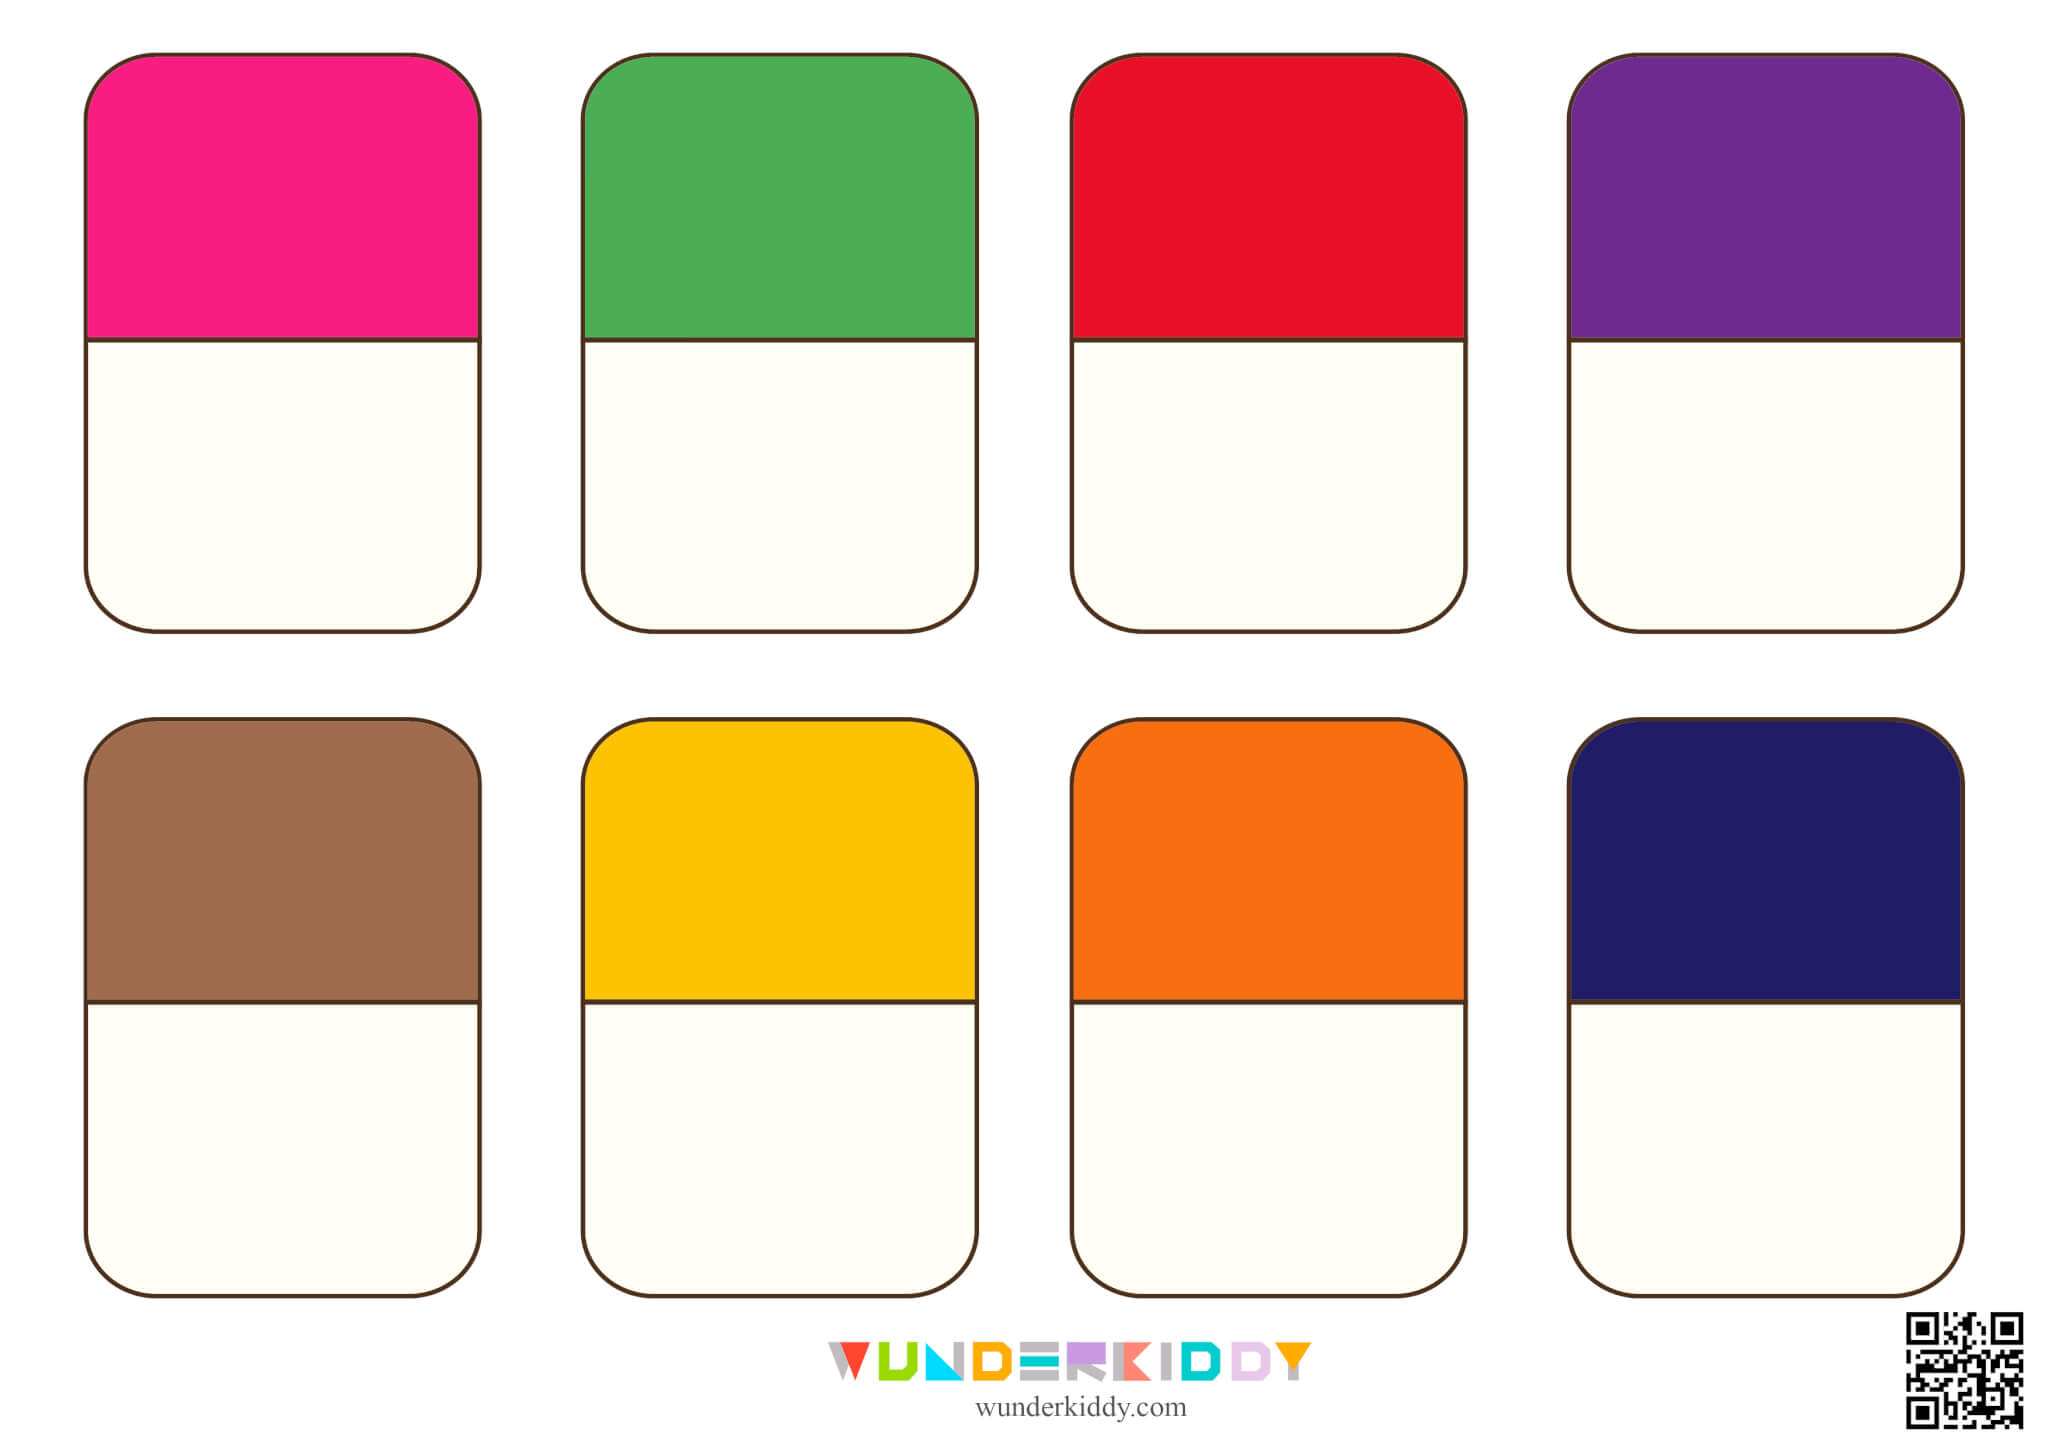 Learning Colors Activity for Kindergarten - Image 2